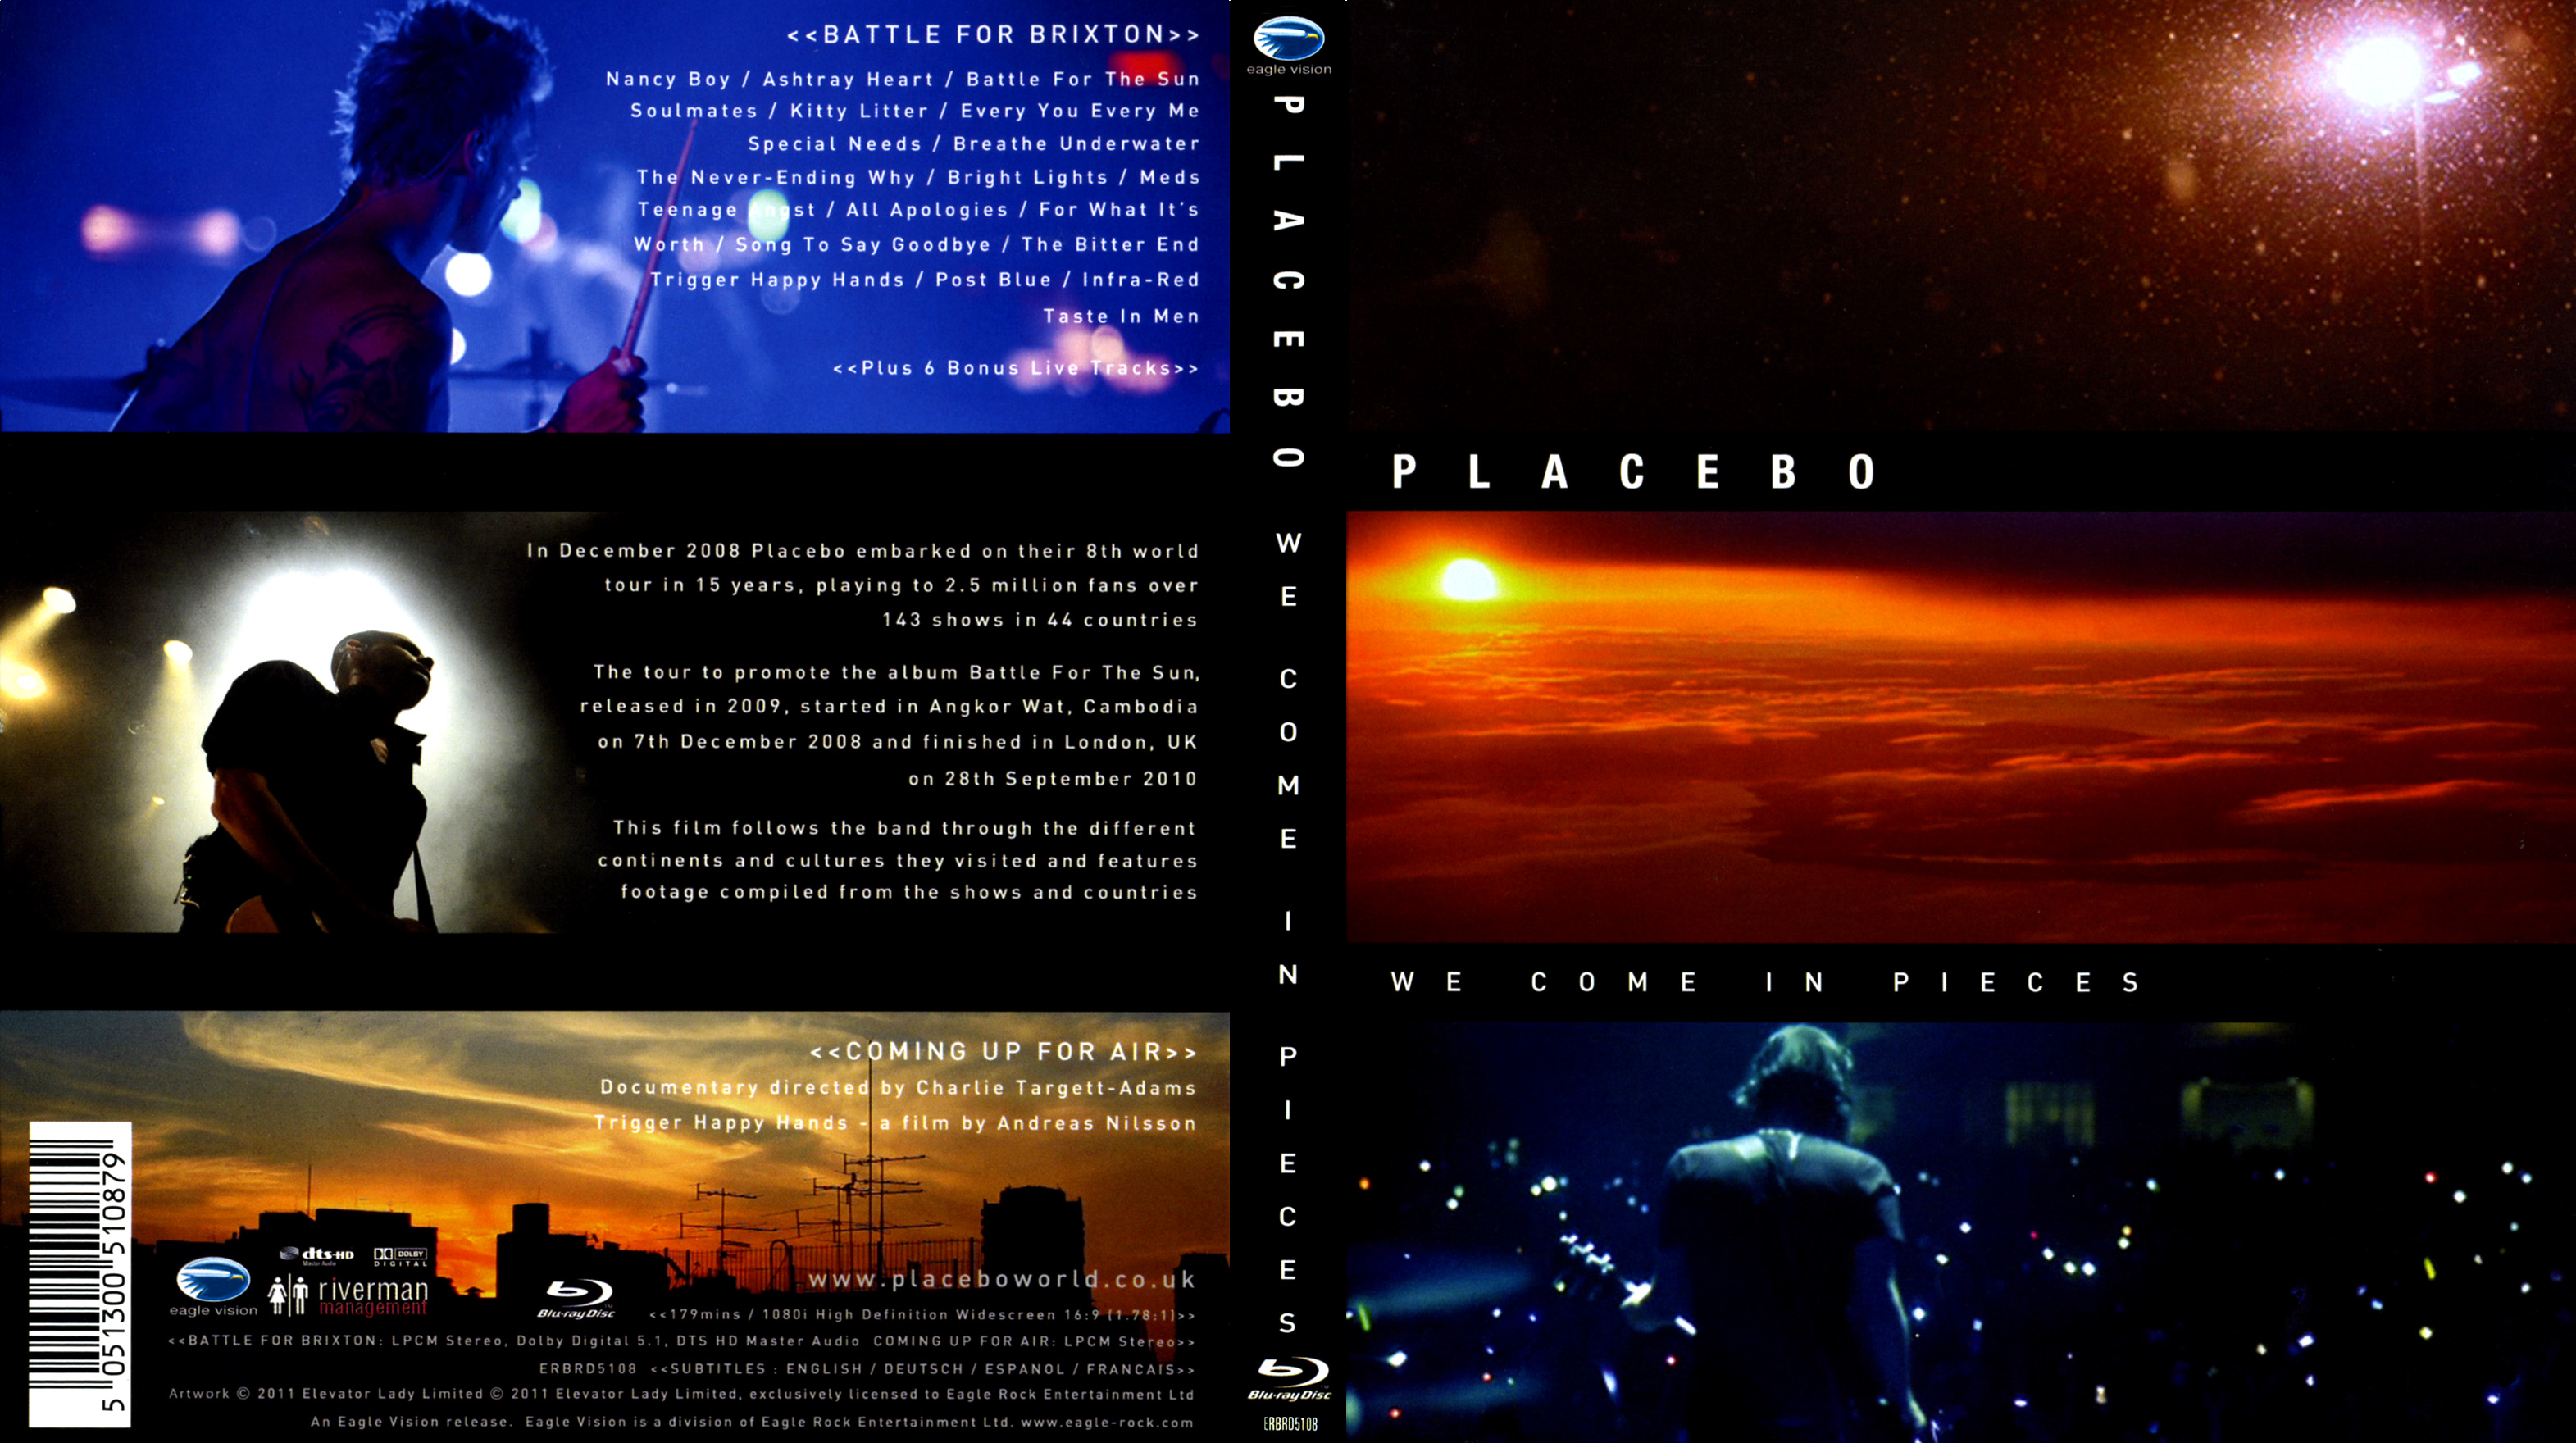 Jaquette DVD Placebo We come in pieces (BLU-RAY)